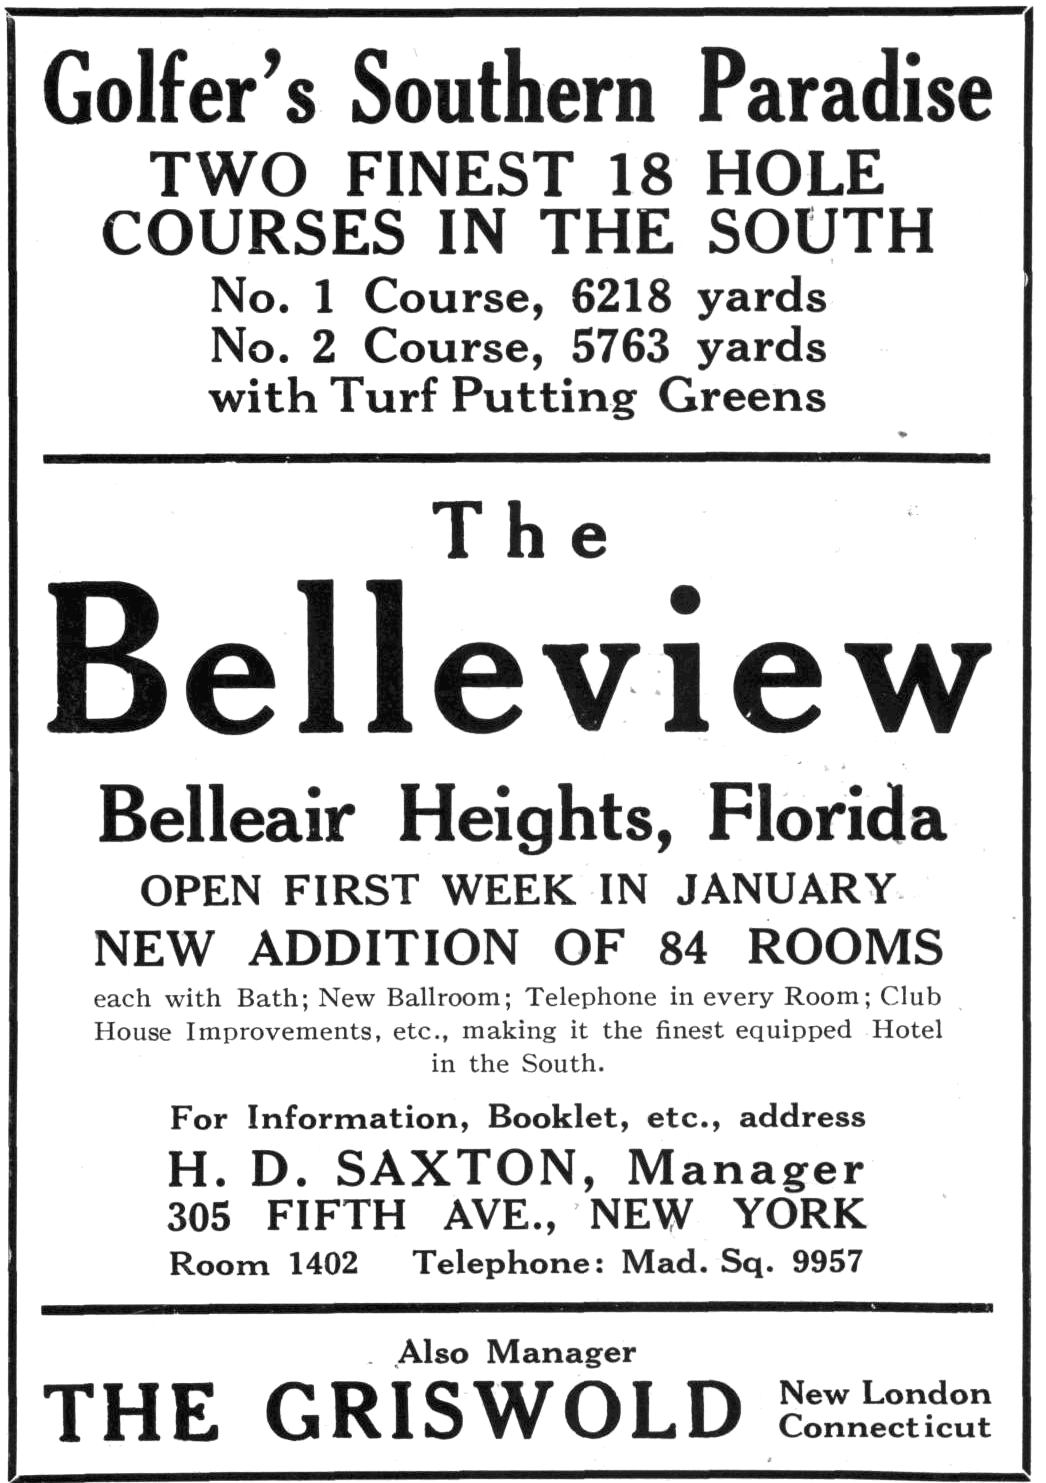 A photo of a vintage ad for the Early American Golf Resort - The Belleview.